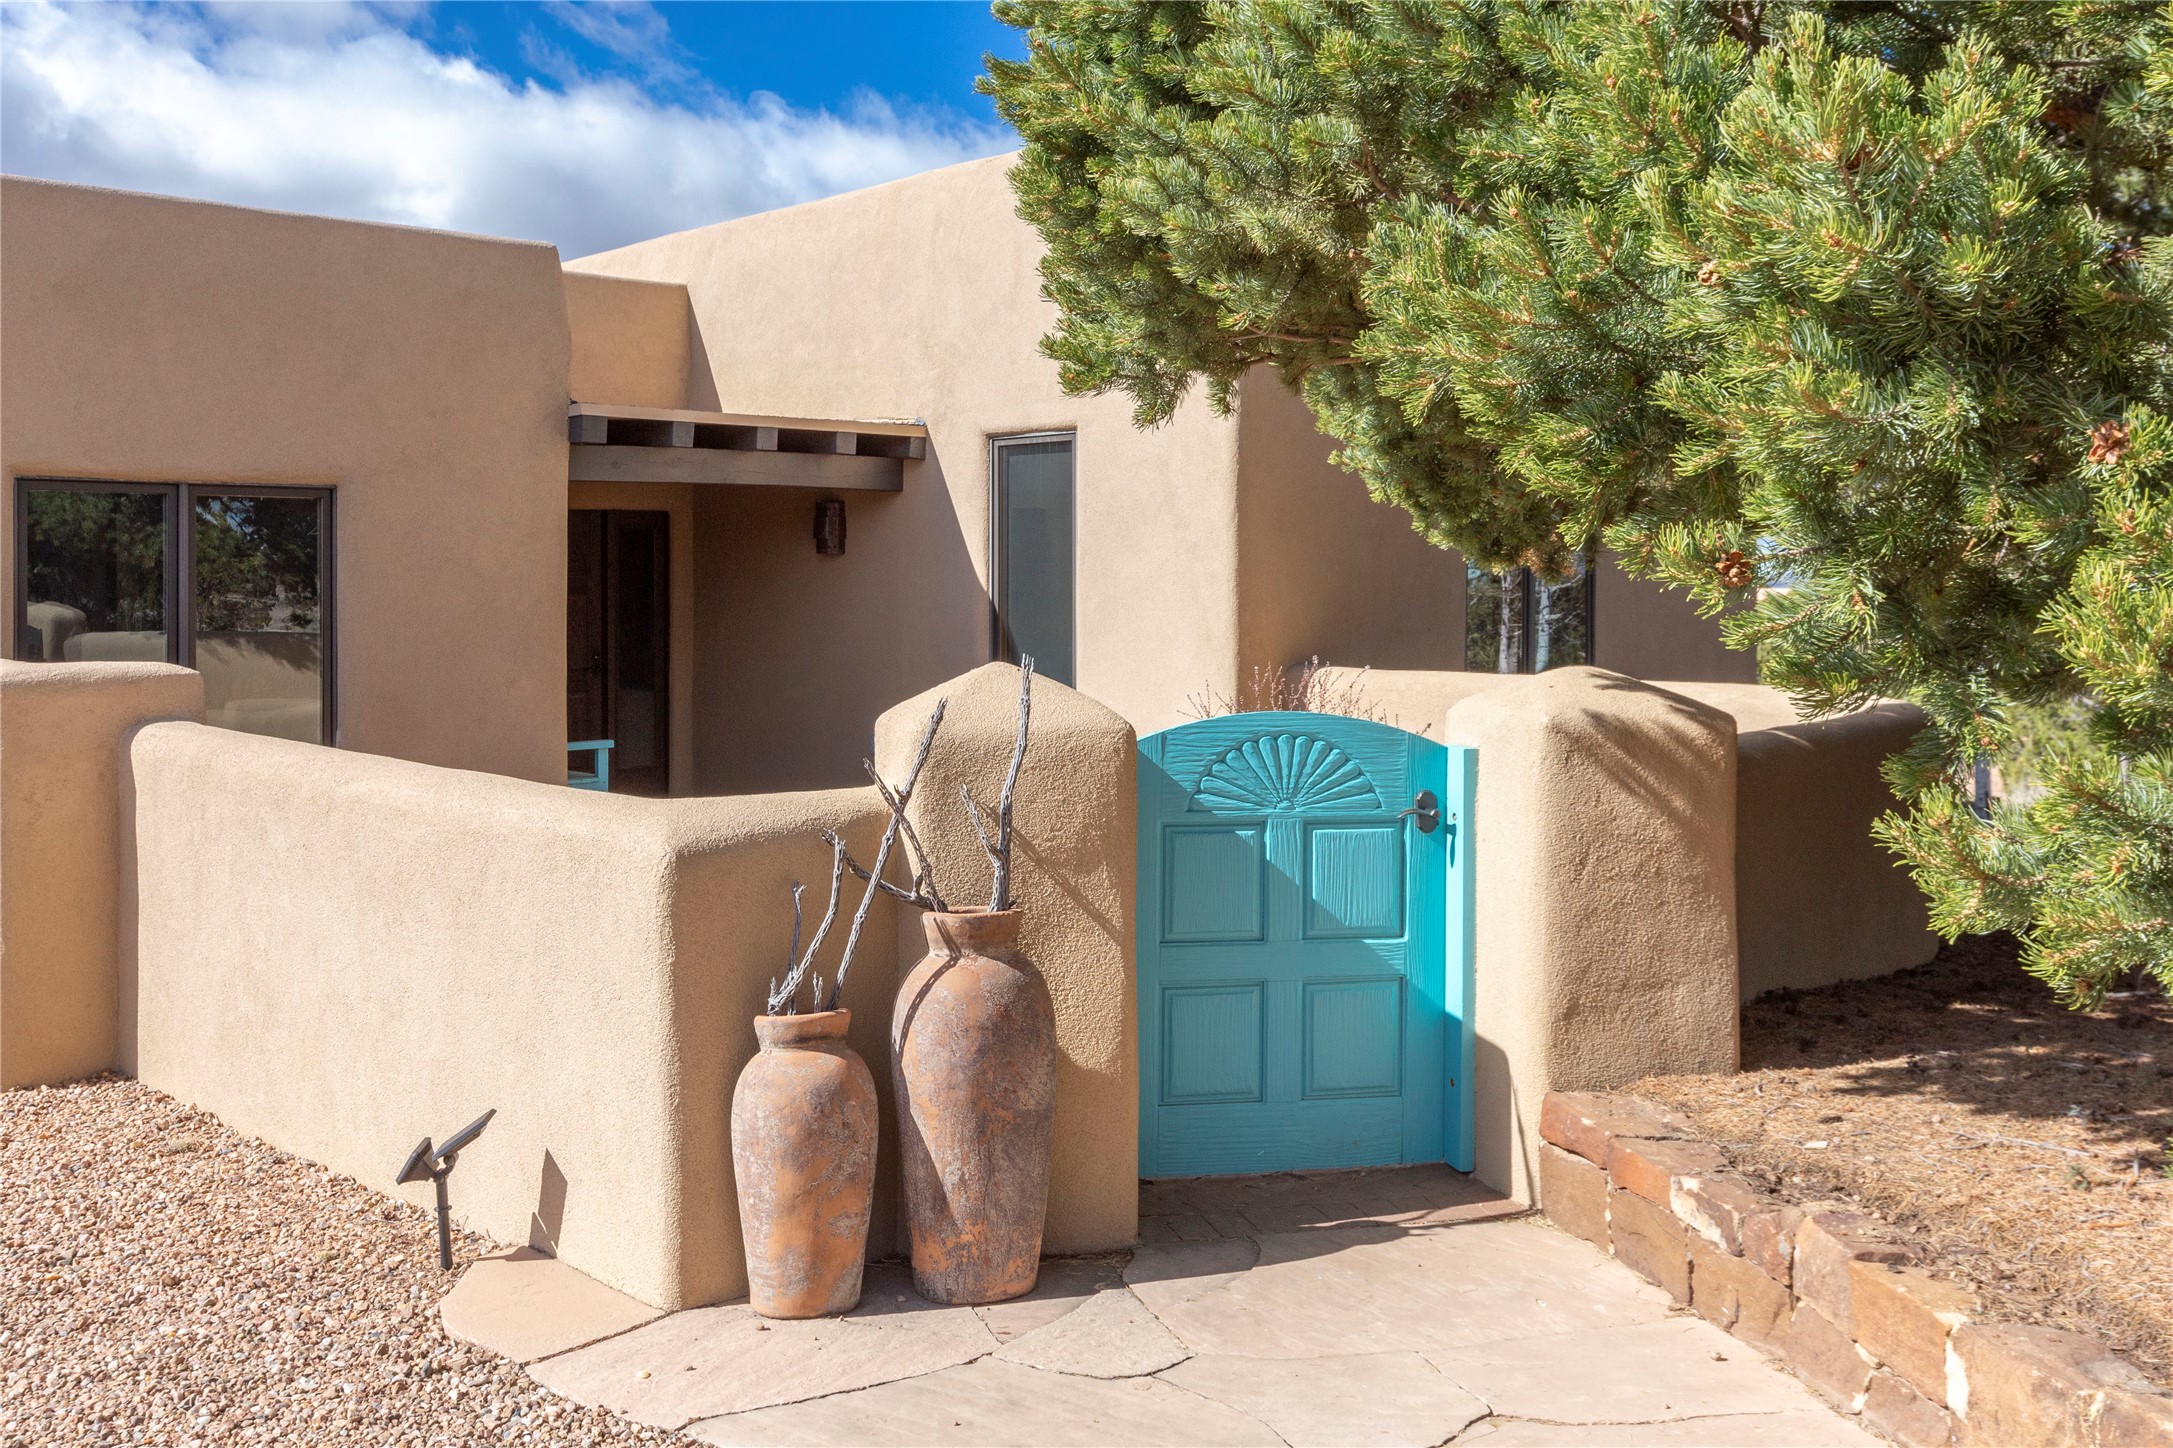 4 E Sand Sage, Santa Fe, New Mexico 87506, 3 Bedrooms Bedrooms, ,3 BathroomsBathrooms,Residential,For Sale,4 E Sand Sage,202400509